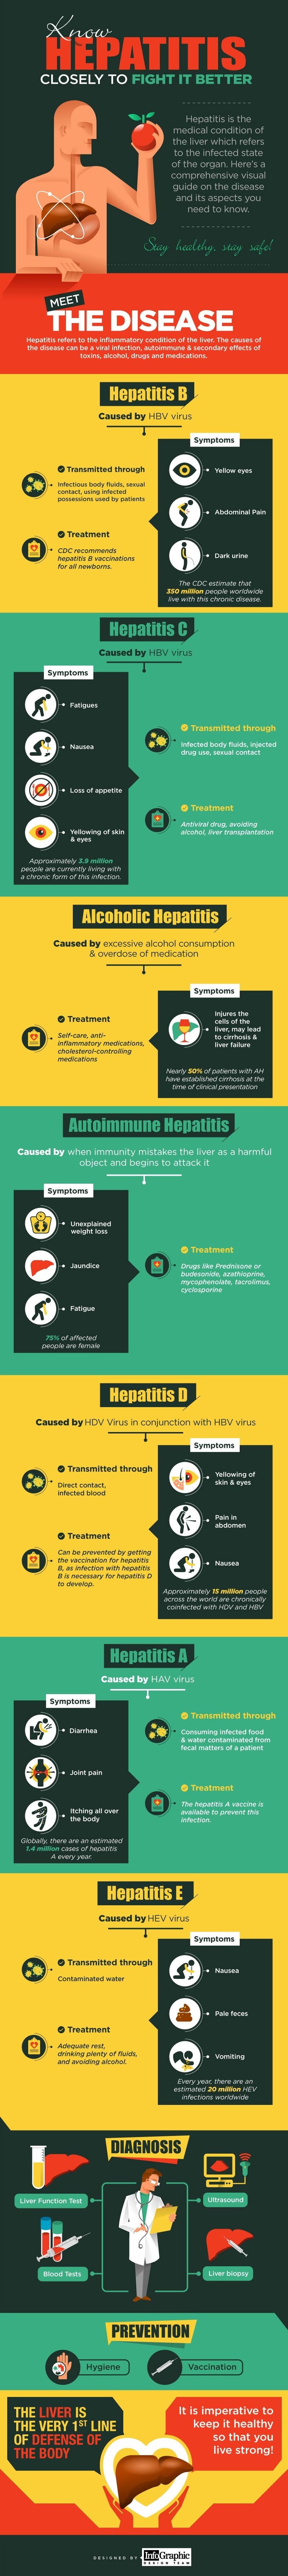 Know Hepatitis Closely To Fight it Better #infographic